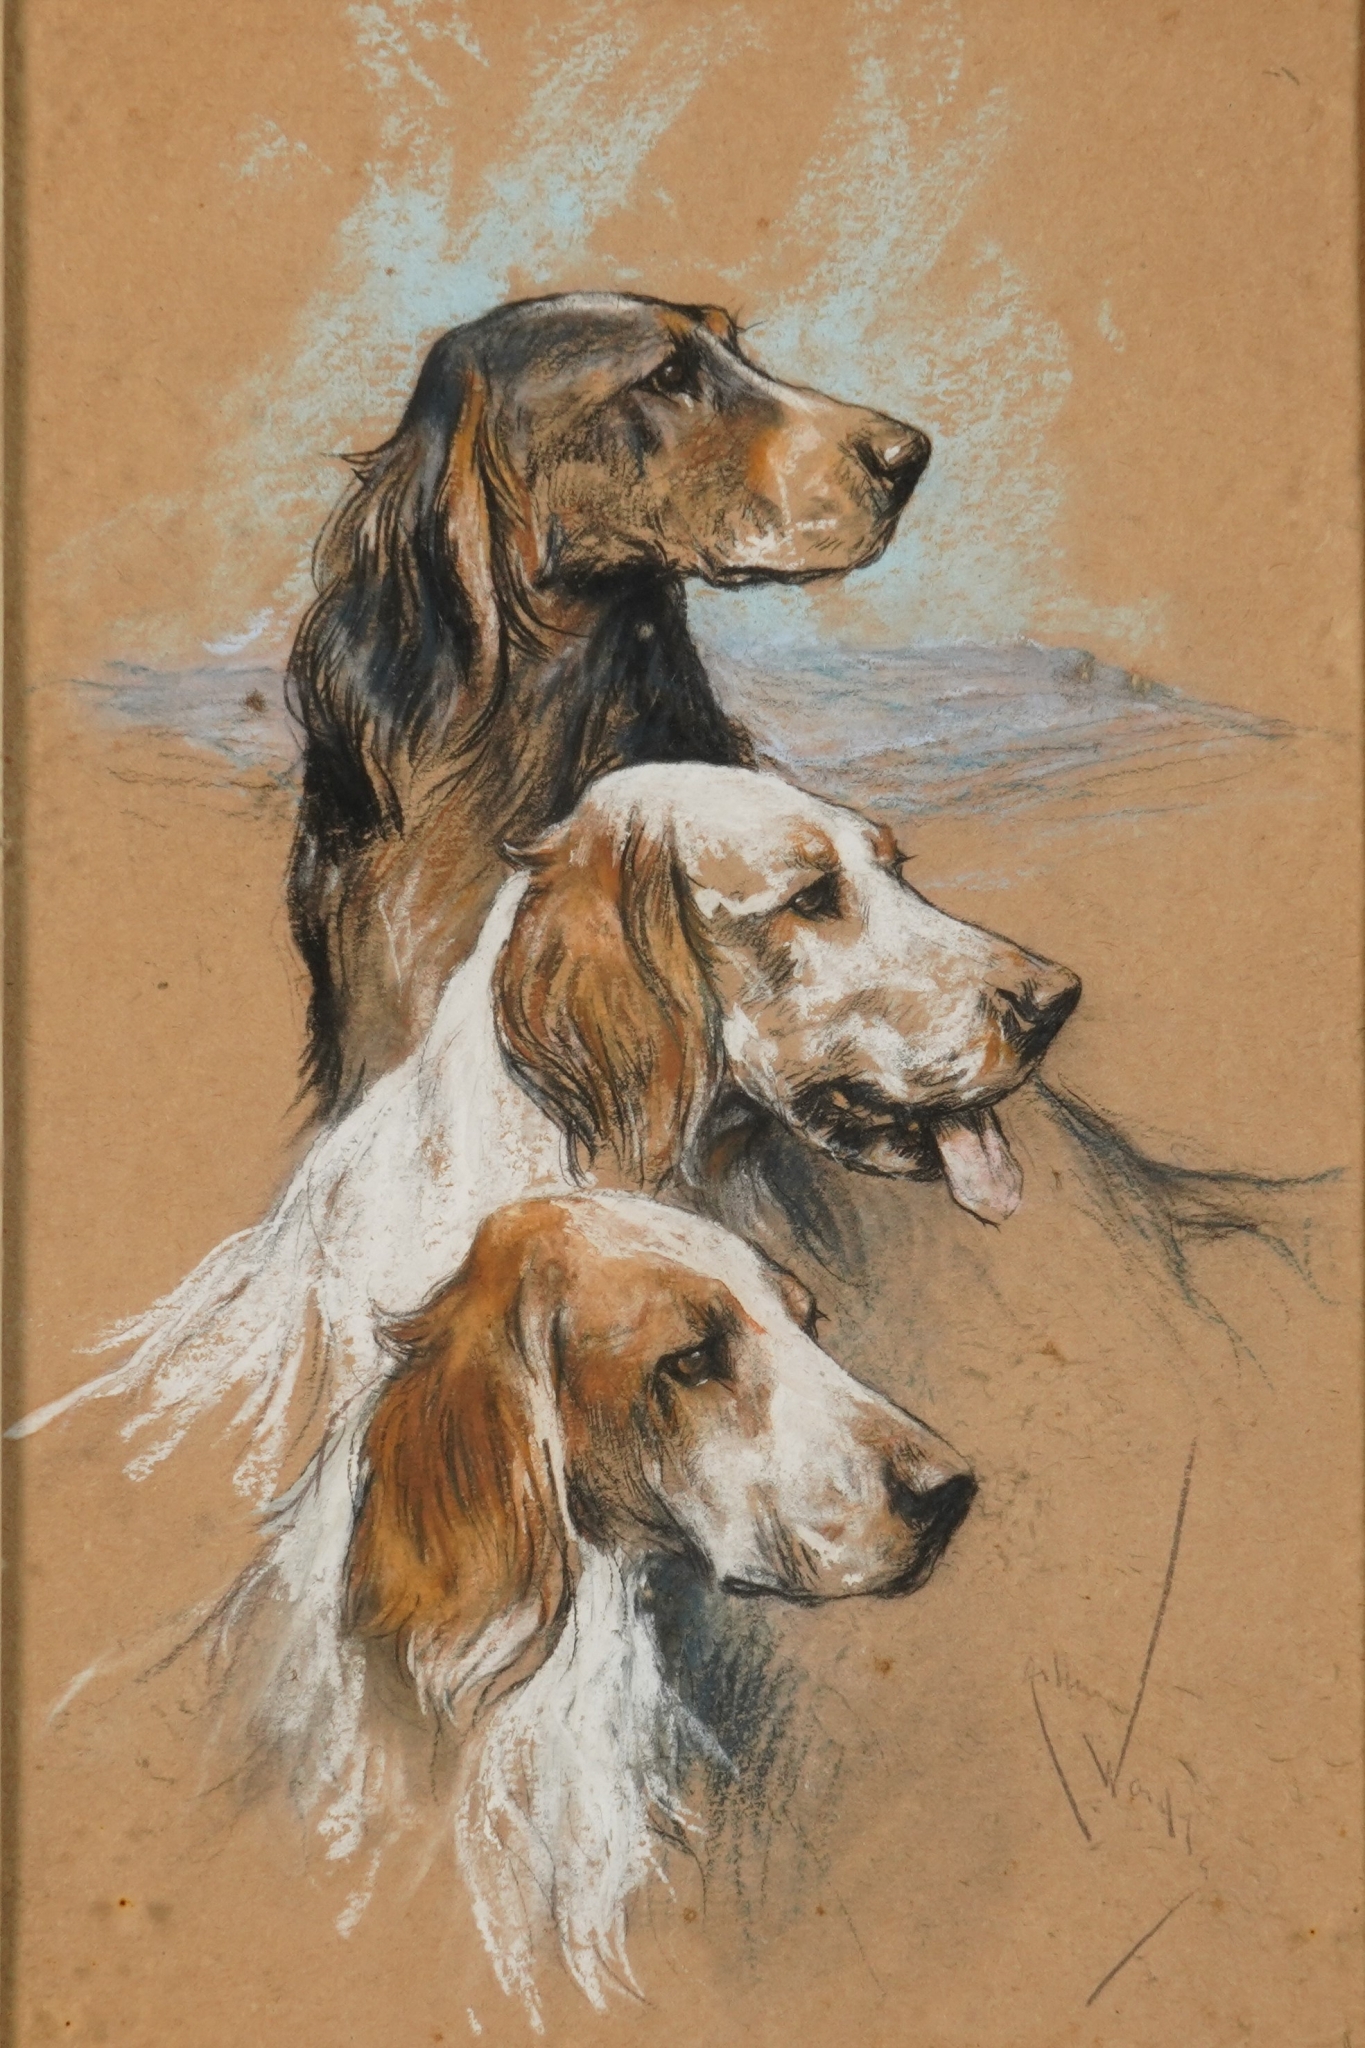 ARTHUR WARDLE (BRITISH, 1864-1949) Three setters in a landscape signed 'Arthur Wardle' (lower right) pencil and pastel on paper 36.5 x 24cm £500-800